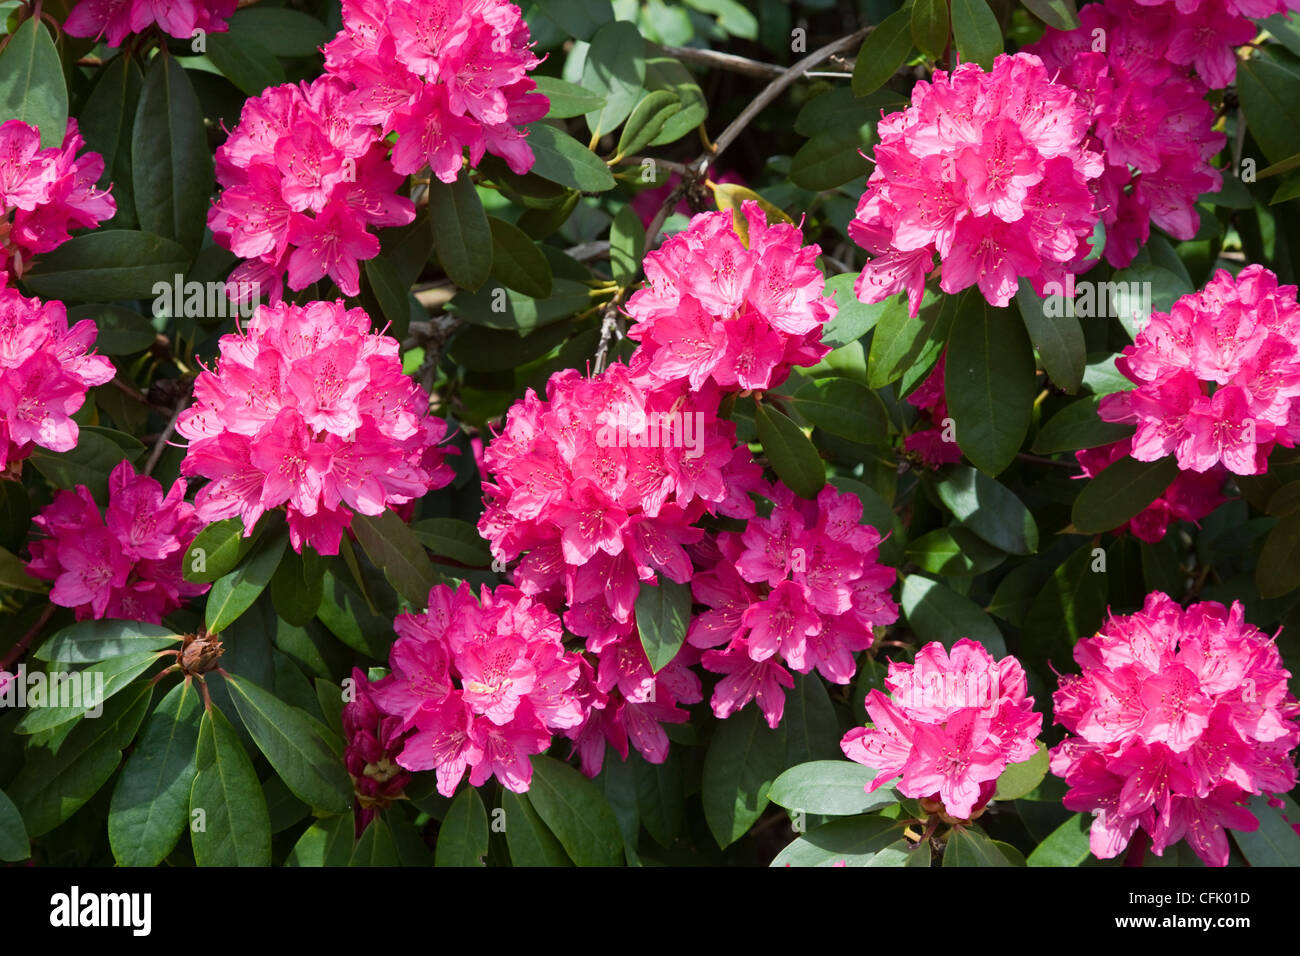 Rhododendron flowers on a rhododendron bush Stock Photo